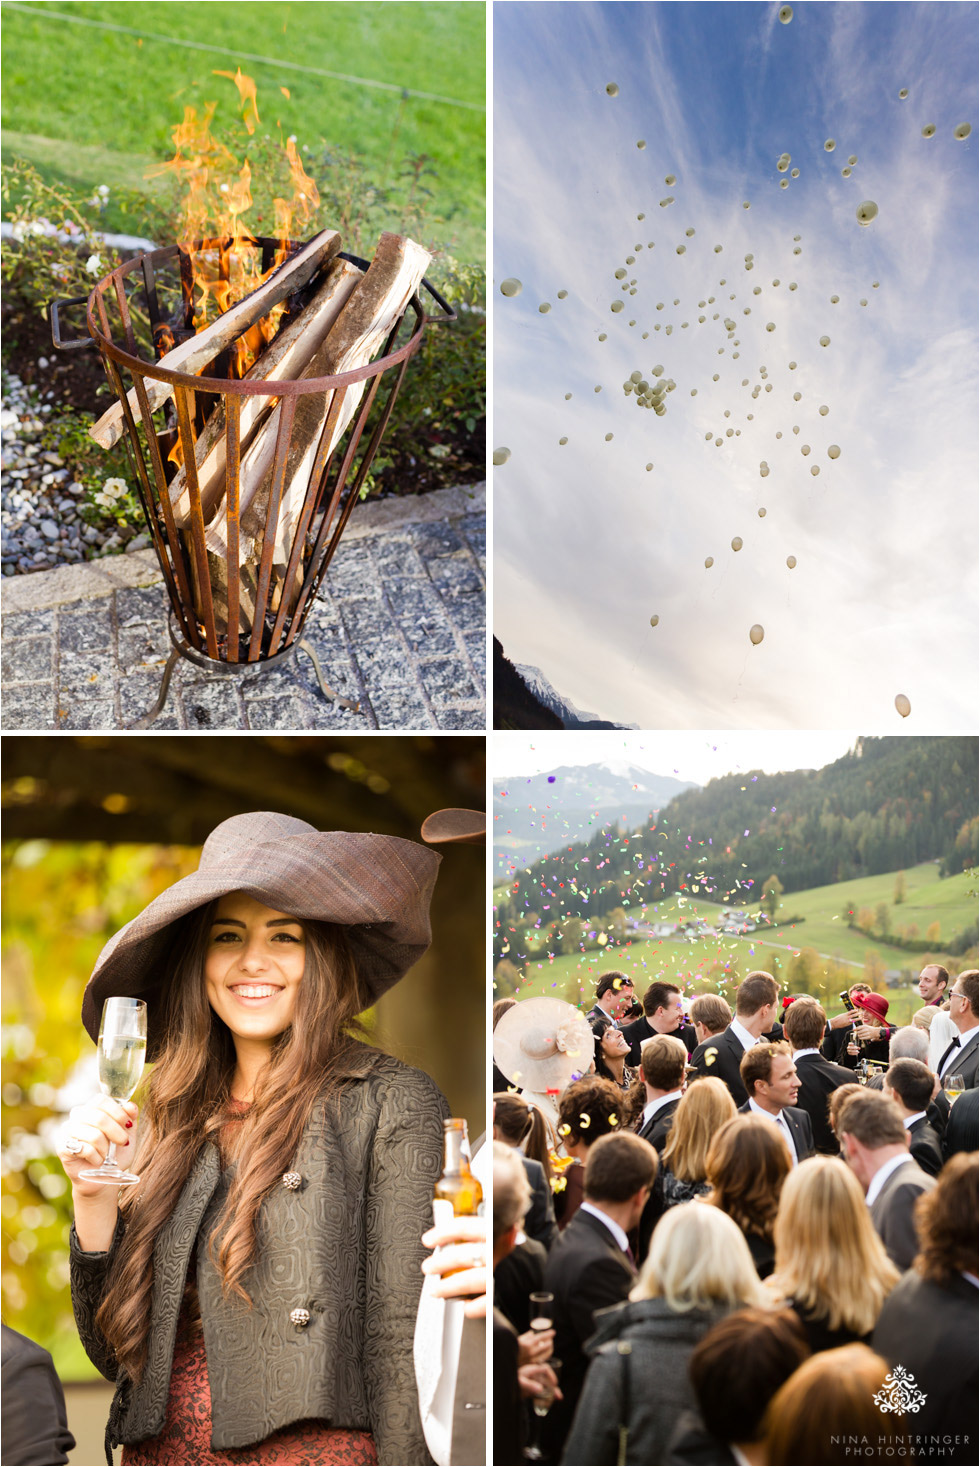 Fall wedding with a touch of winter | Carina & Fritz | Kufstein, Söll - Tyrol - Blog of Nina Hintringer Photography - Wedding Photography, Wedding Reportage and Destination Weddings